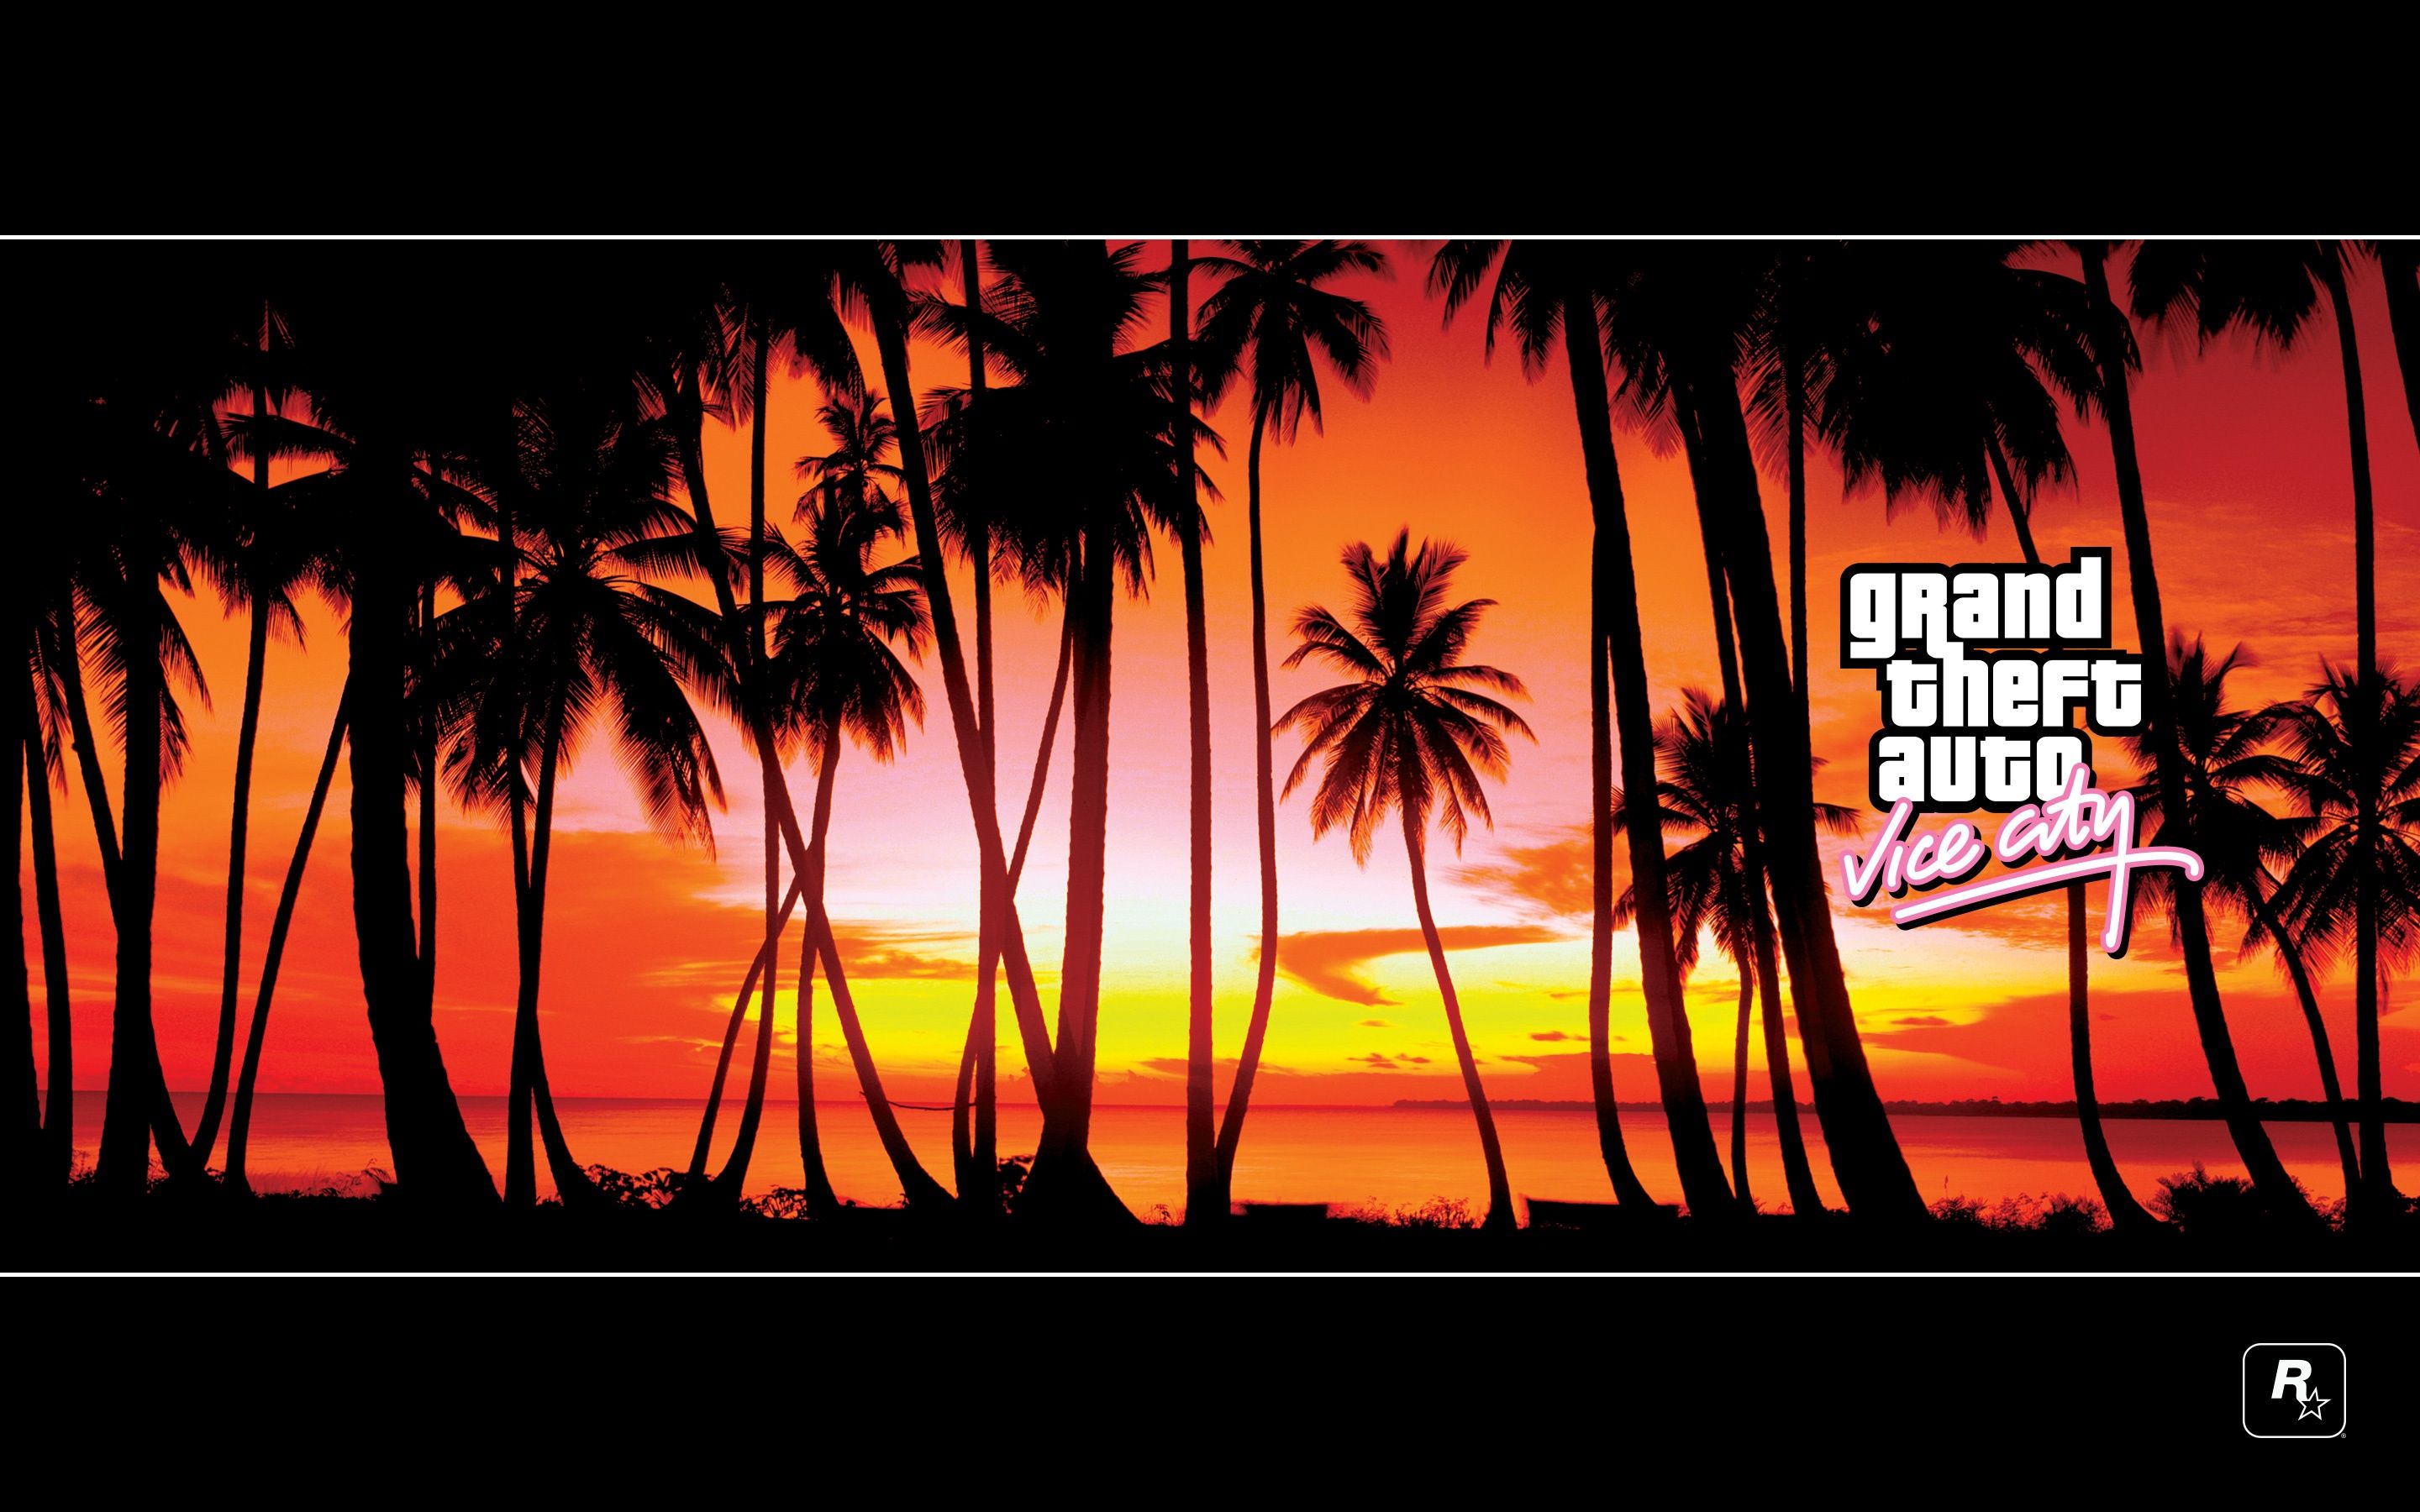 Grand Theft Auto: Vice City Wallpapers | Just Good Vibe